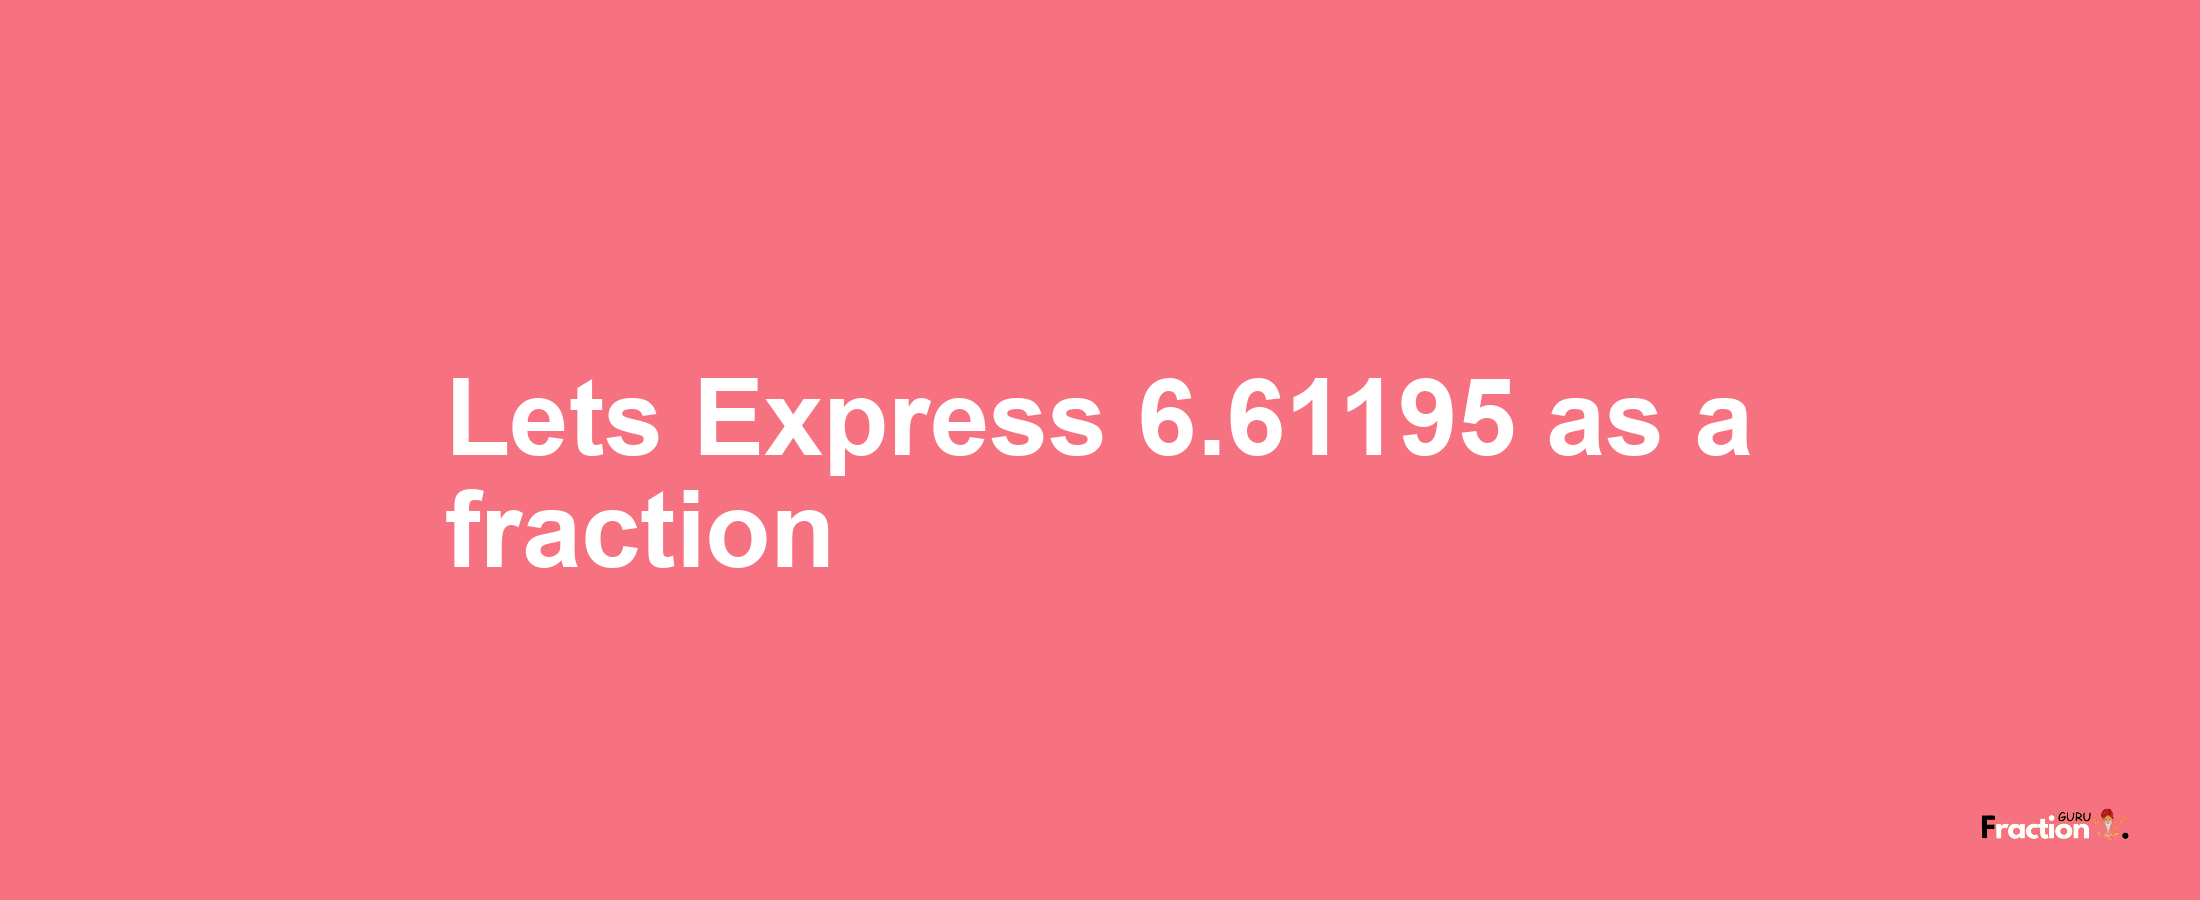 Lets Express 6.61195 as afraction